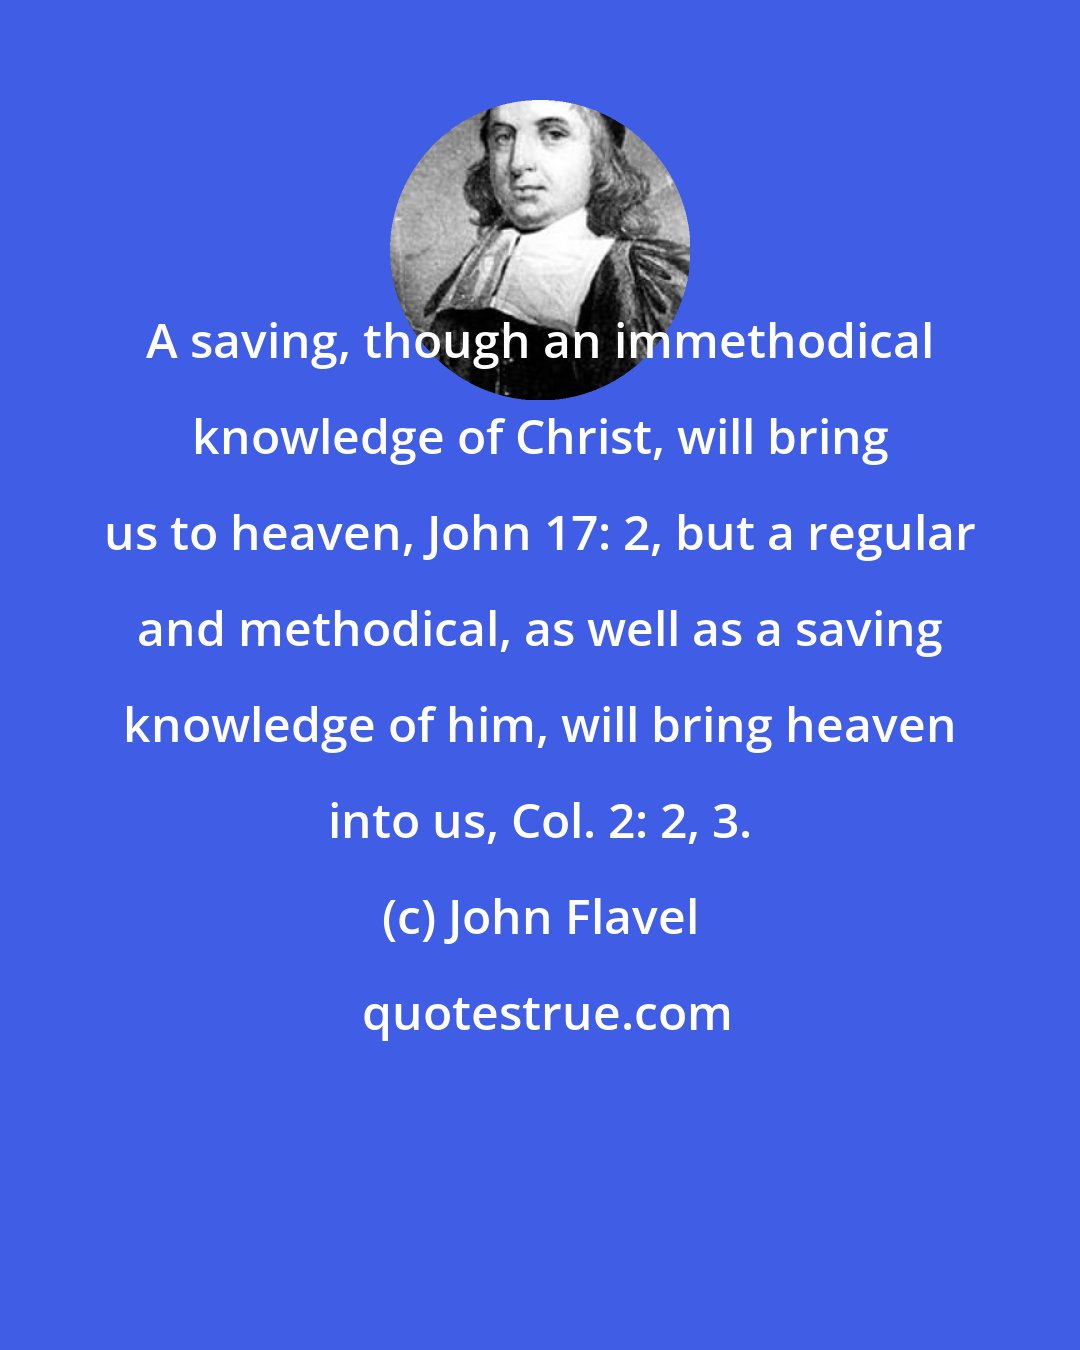 John Flavel: A saving, though an immethodical knowledge of Christ, will bring us to heaven, John 17: 2, but a regular and methodical, as well as a saving knowledge of him, will bring heaven into us, Col. 2: 2, 3.